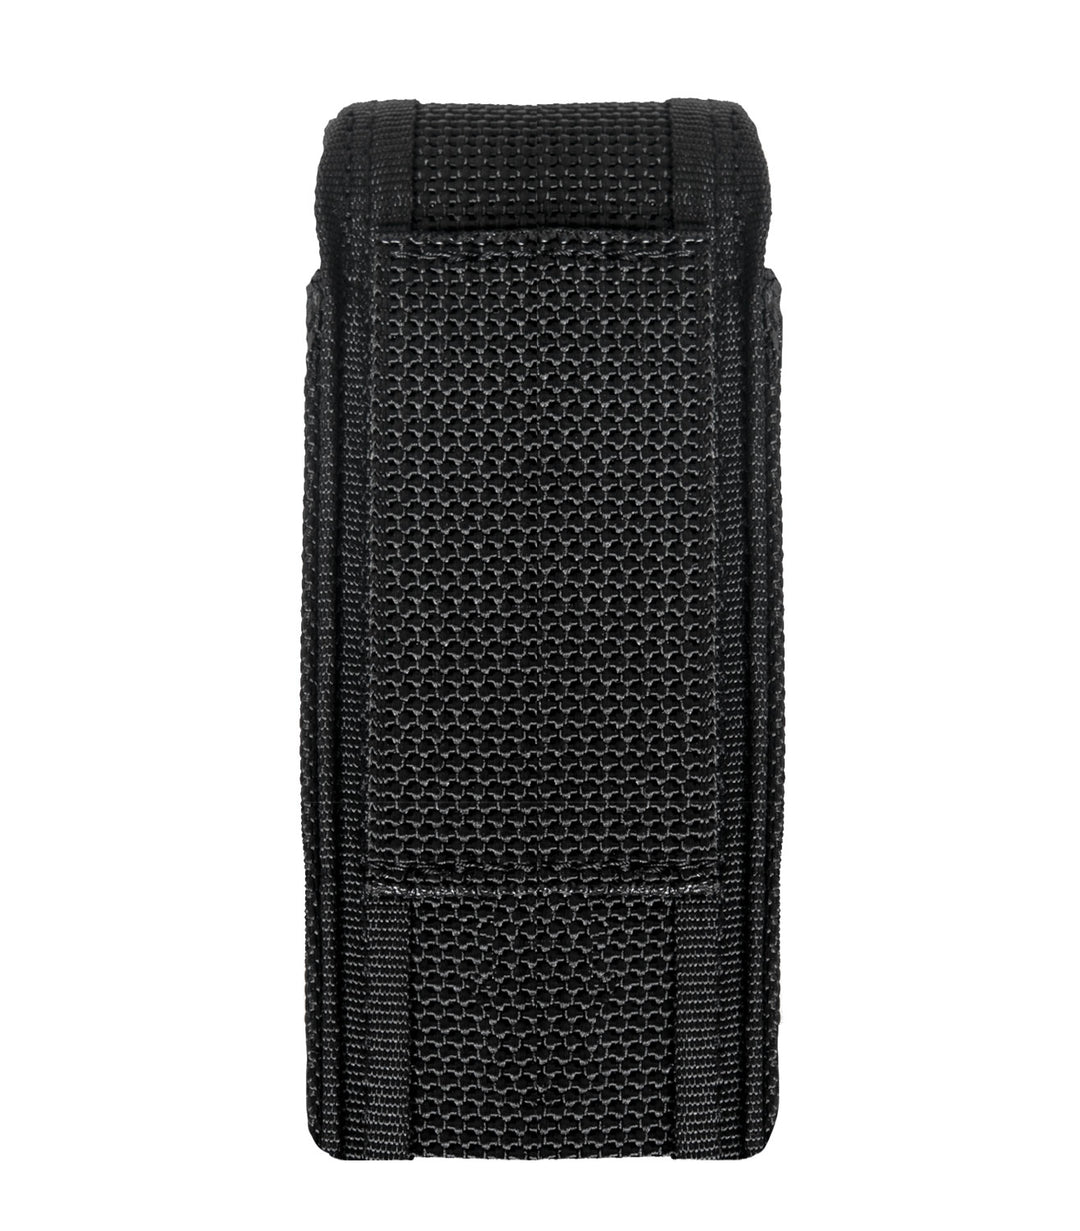 Rothco Police Small Pepper Spray Holder with Flap